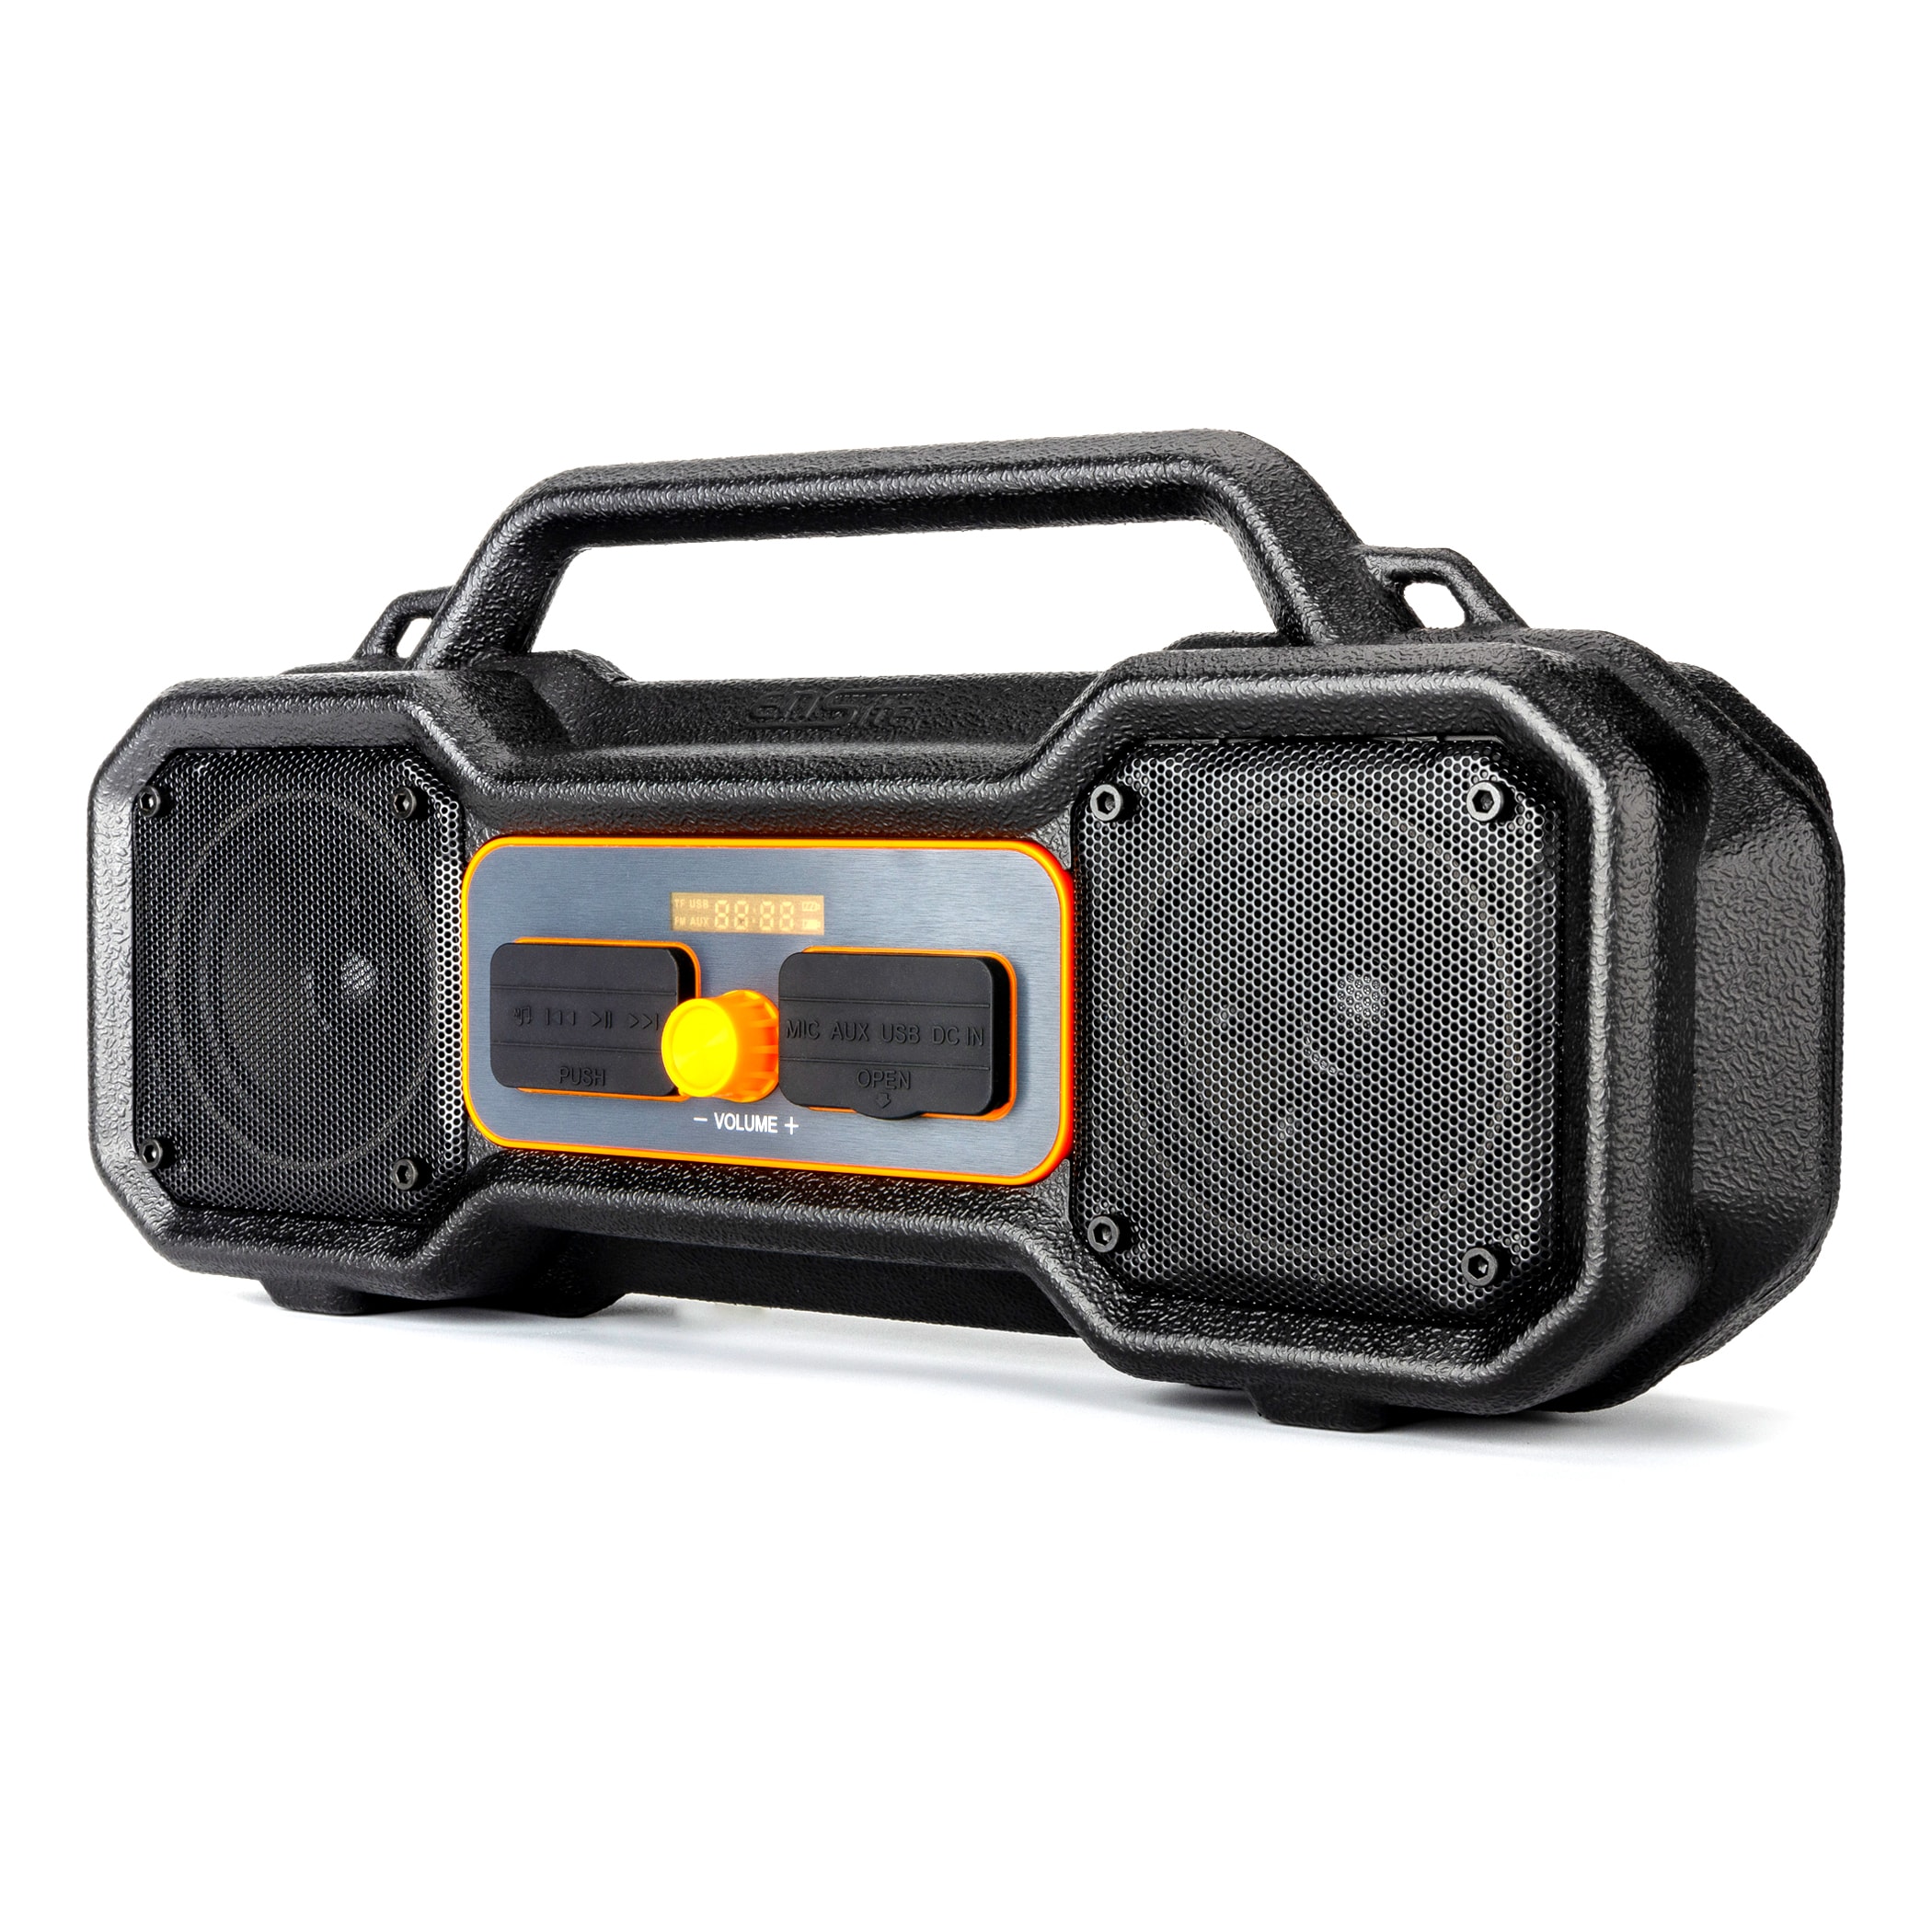 Boombox Buying Guide: Boombox Sizes & Styles